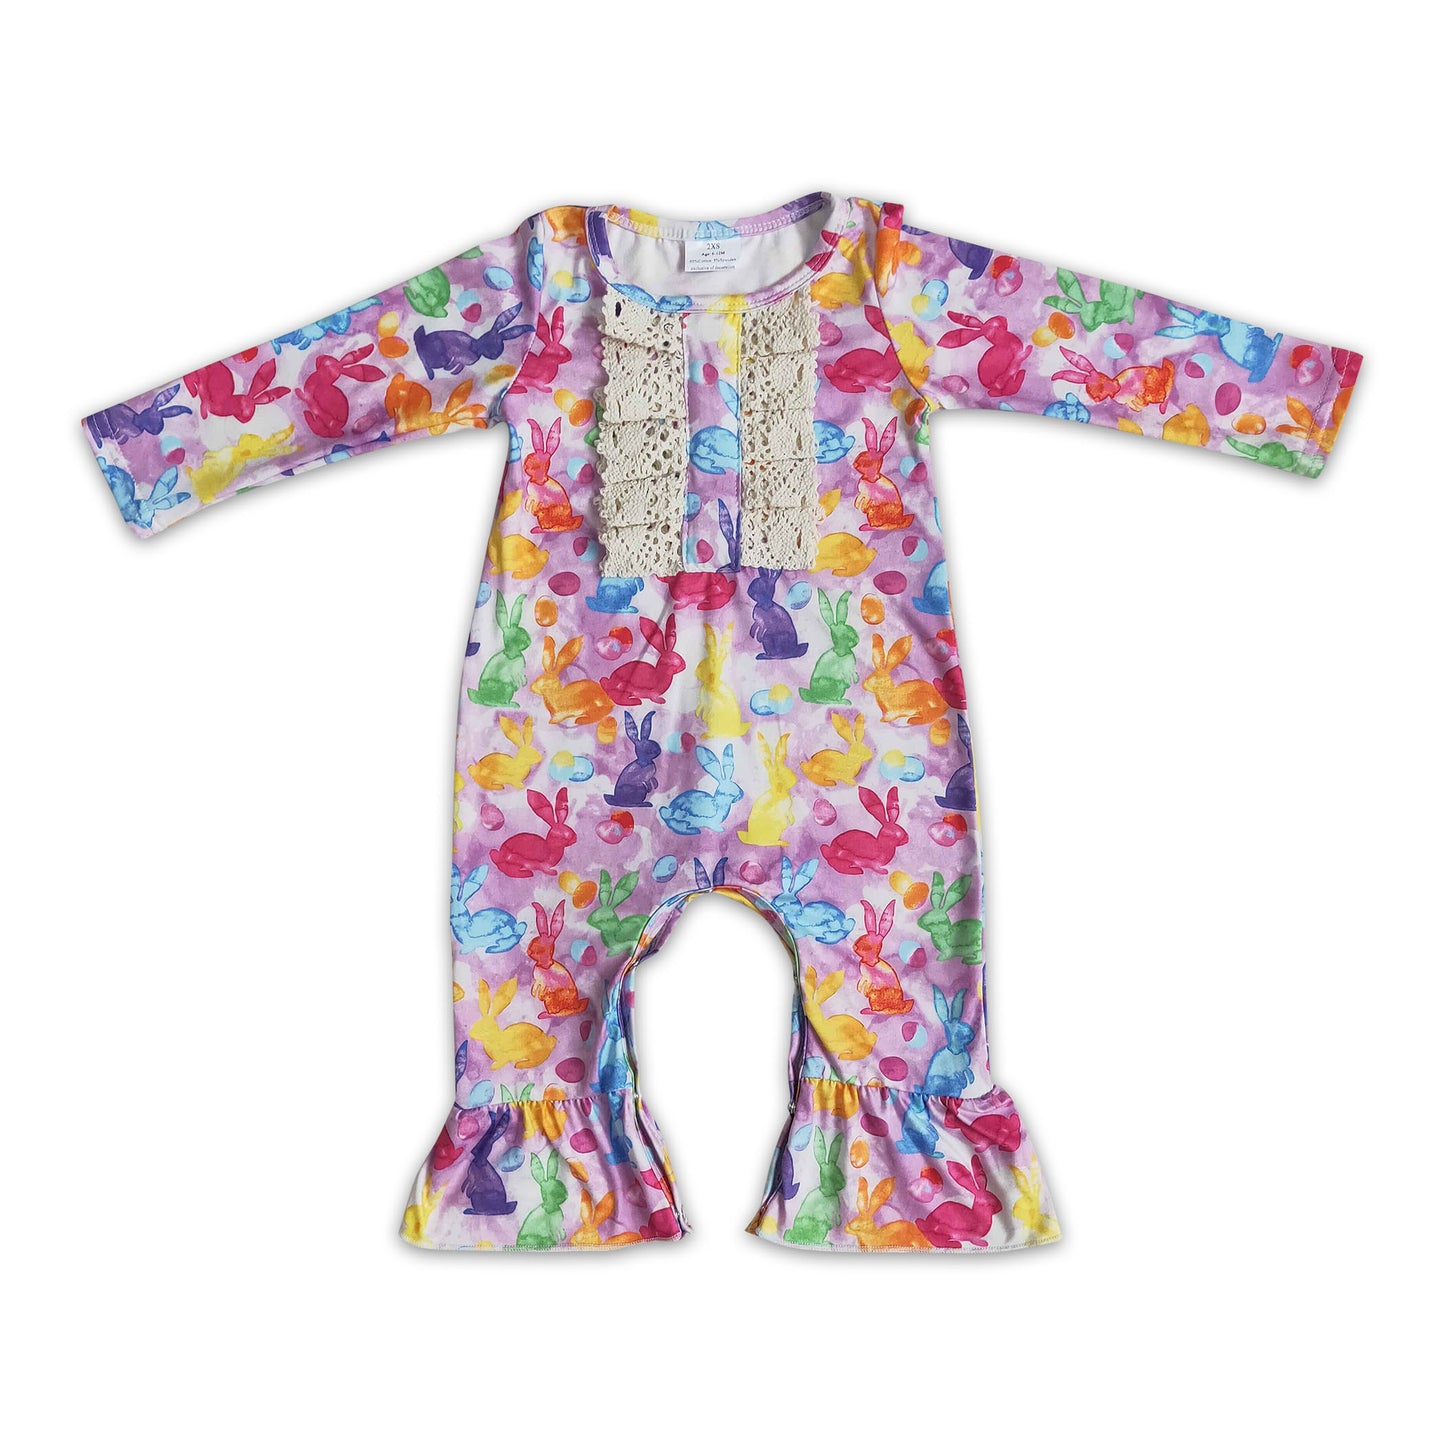 Long sleeve colorful bunny baby girls easter romper